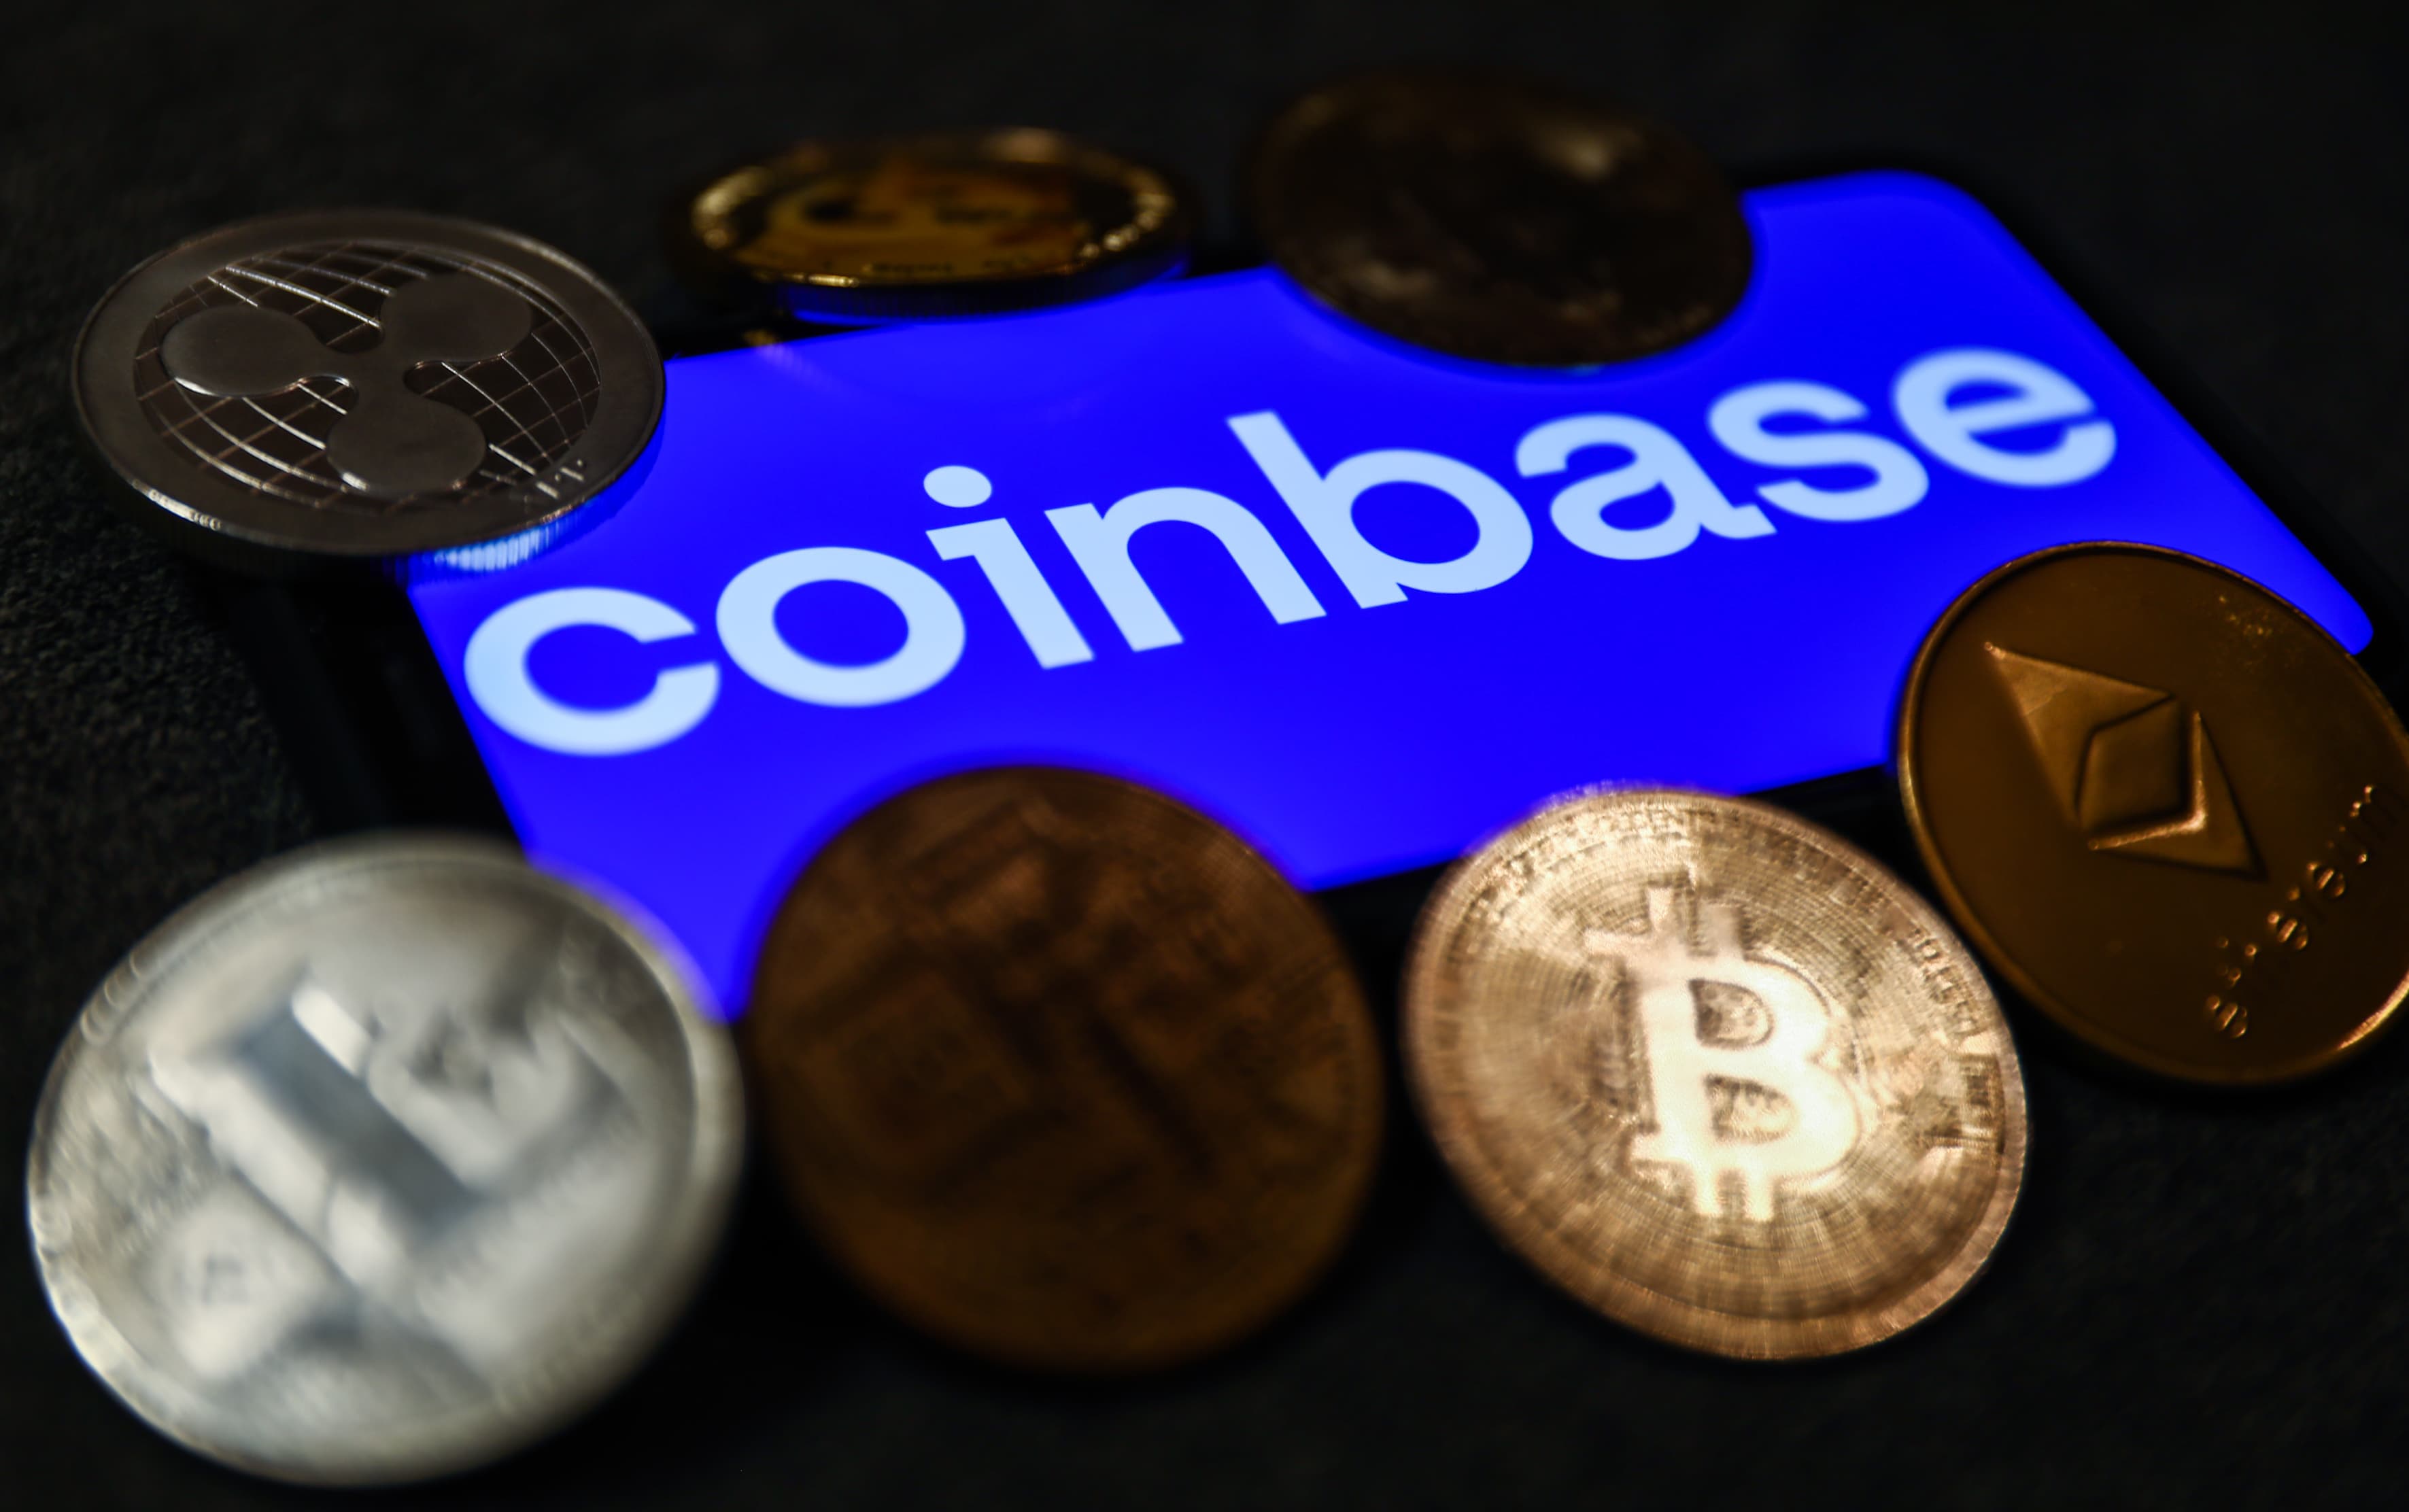 Coinbase's stock is due for a 40% drop even if bitcoin ETFs are approved, Bank of America says